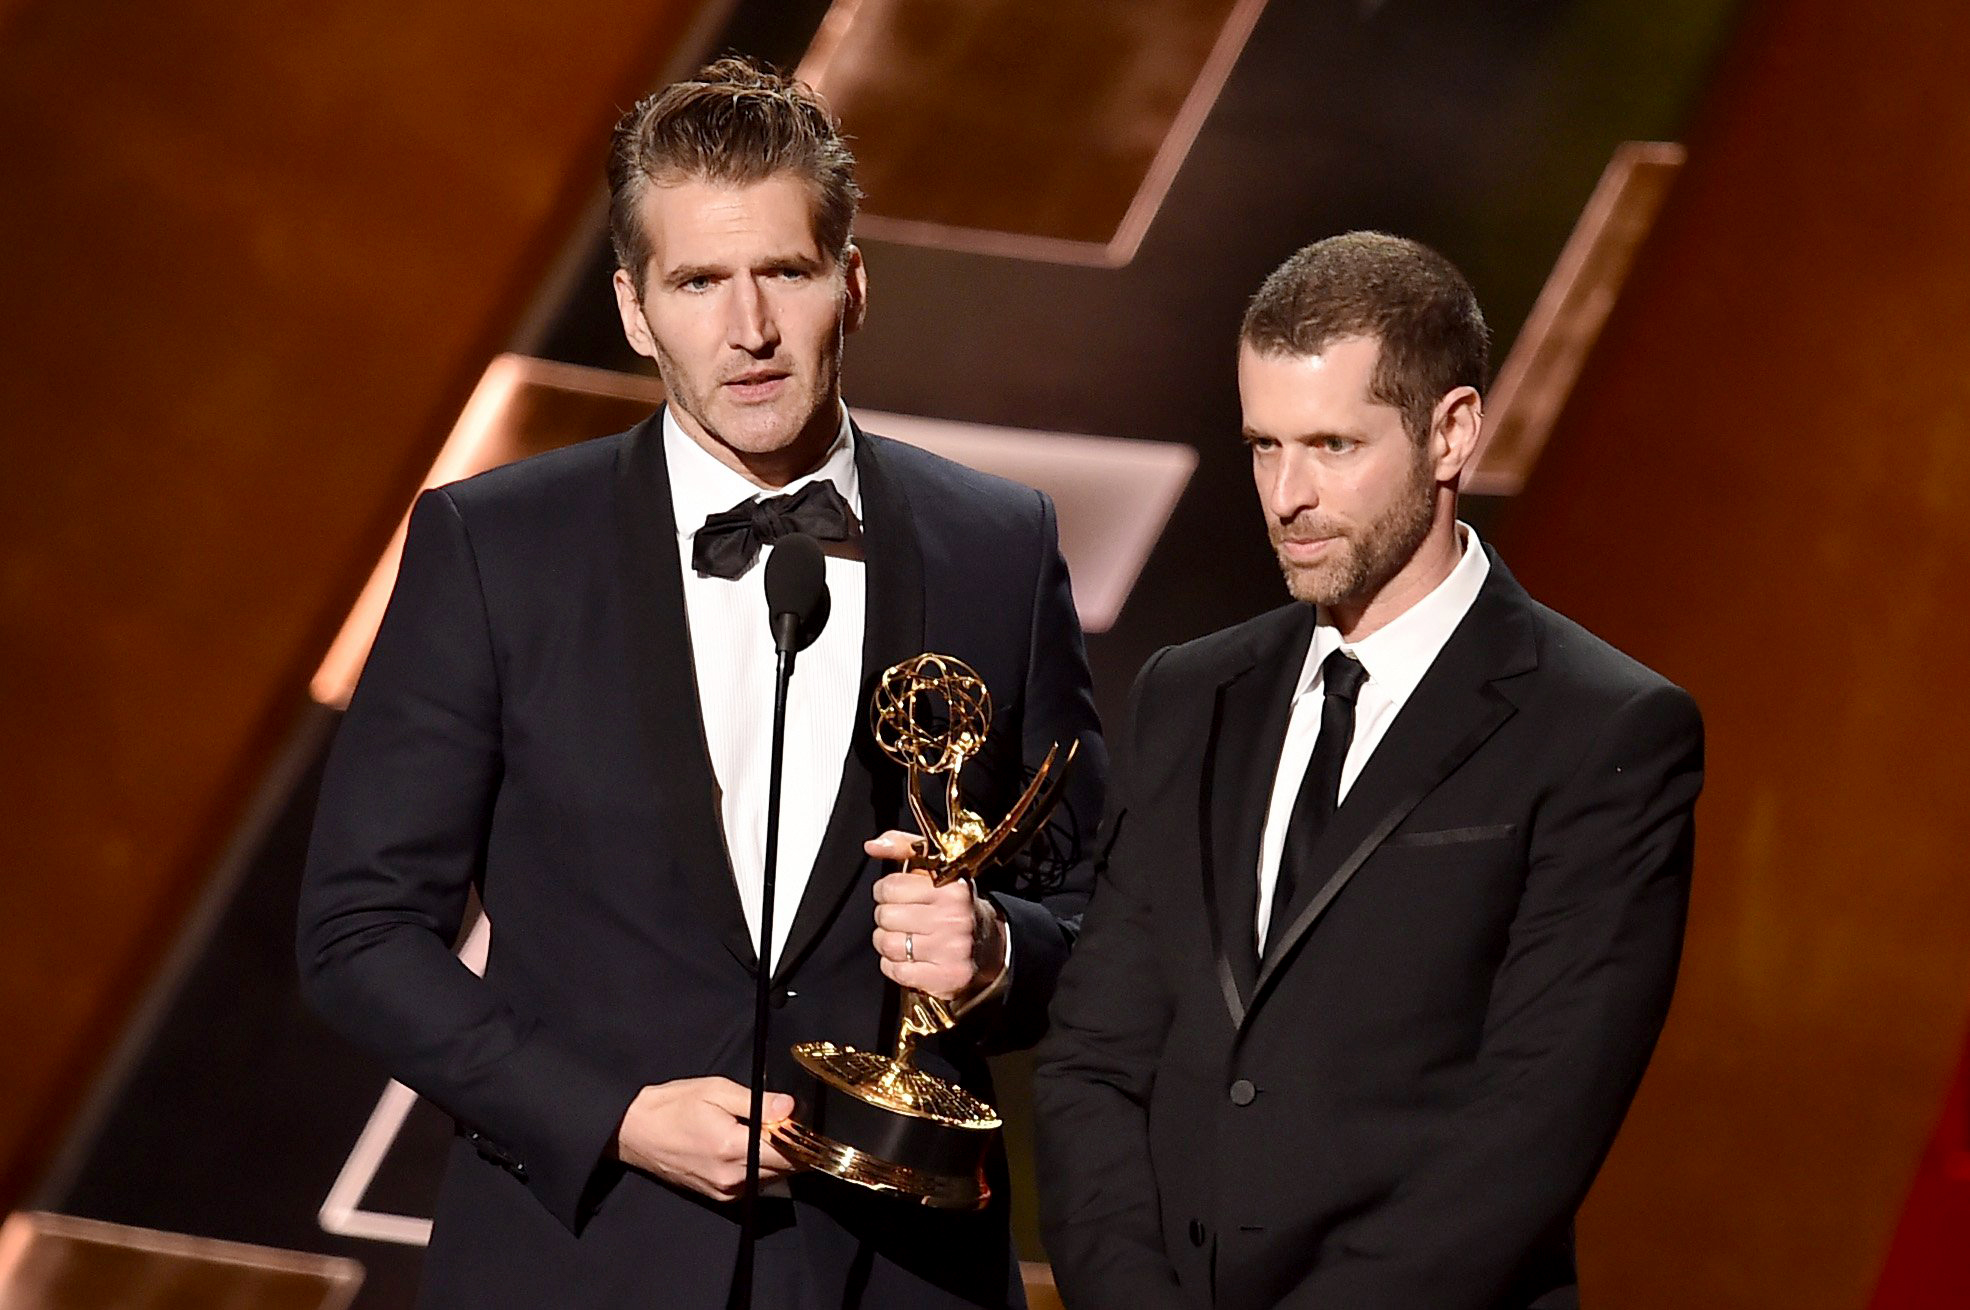 Showrunners David Benioff and D.B. Weiss accept writing award at 2015 Emmy Awards (Photo by Kevin Winter/Getty Images)